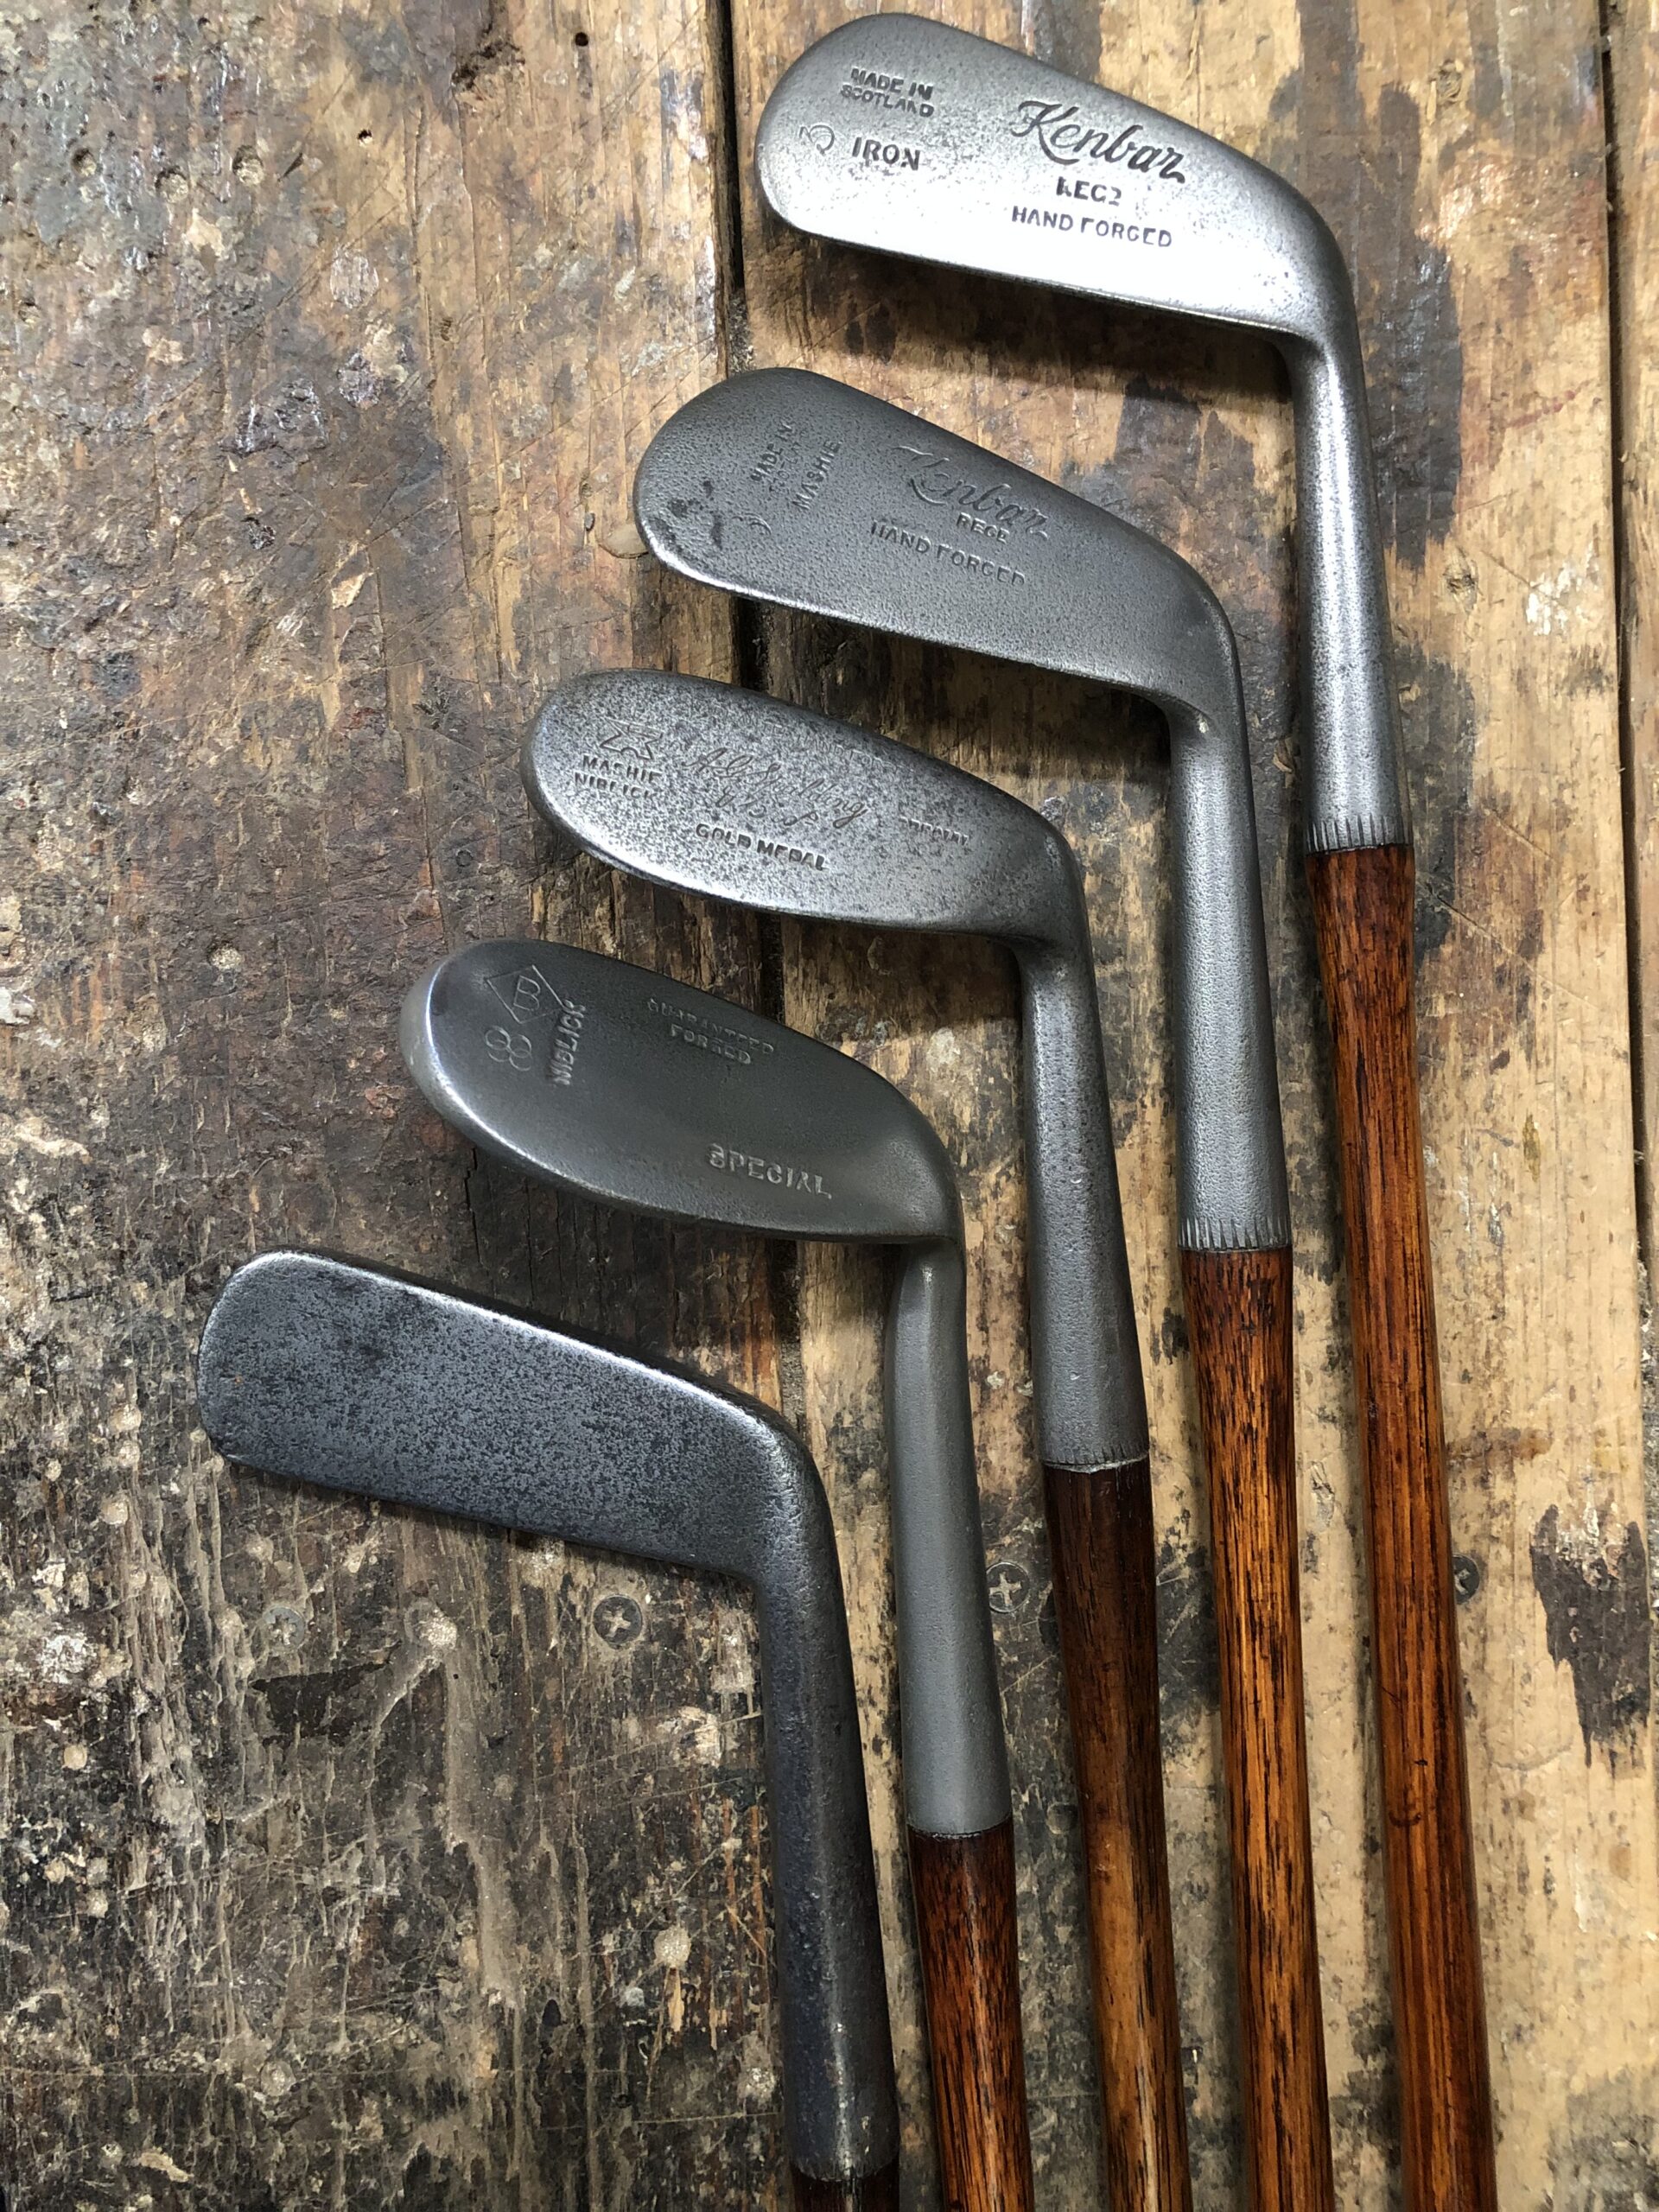 Playable set of 5 hickory irons c.1910-1928